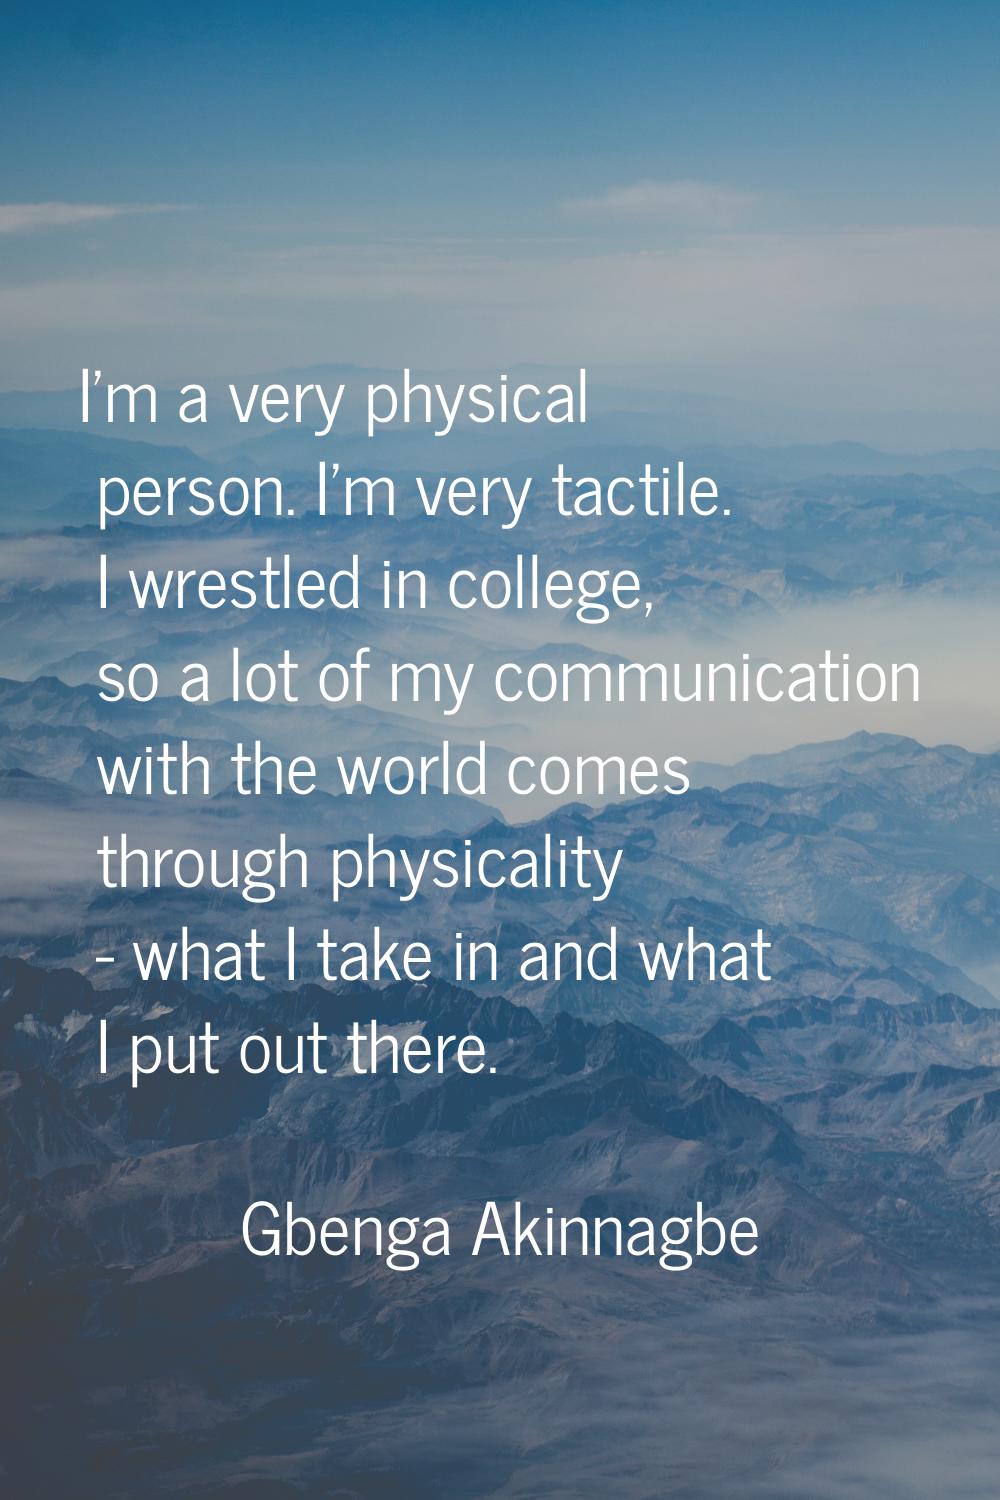 I'm a very physical person. I'm very tactile. I wrestled in college, so a lot of my communication w